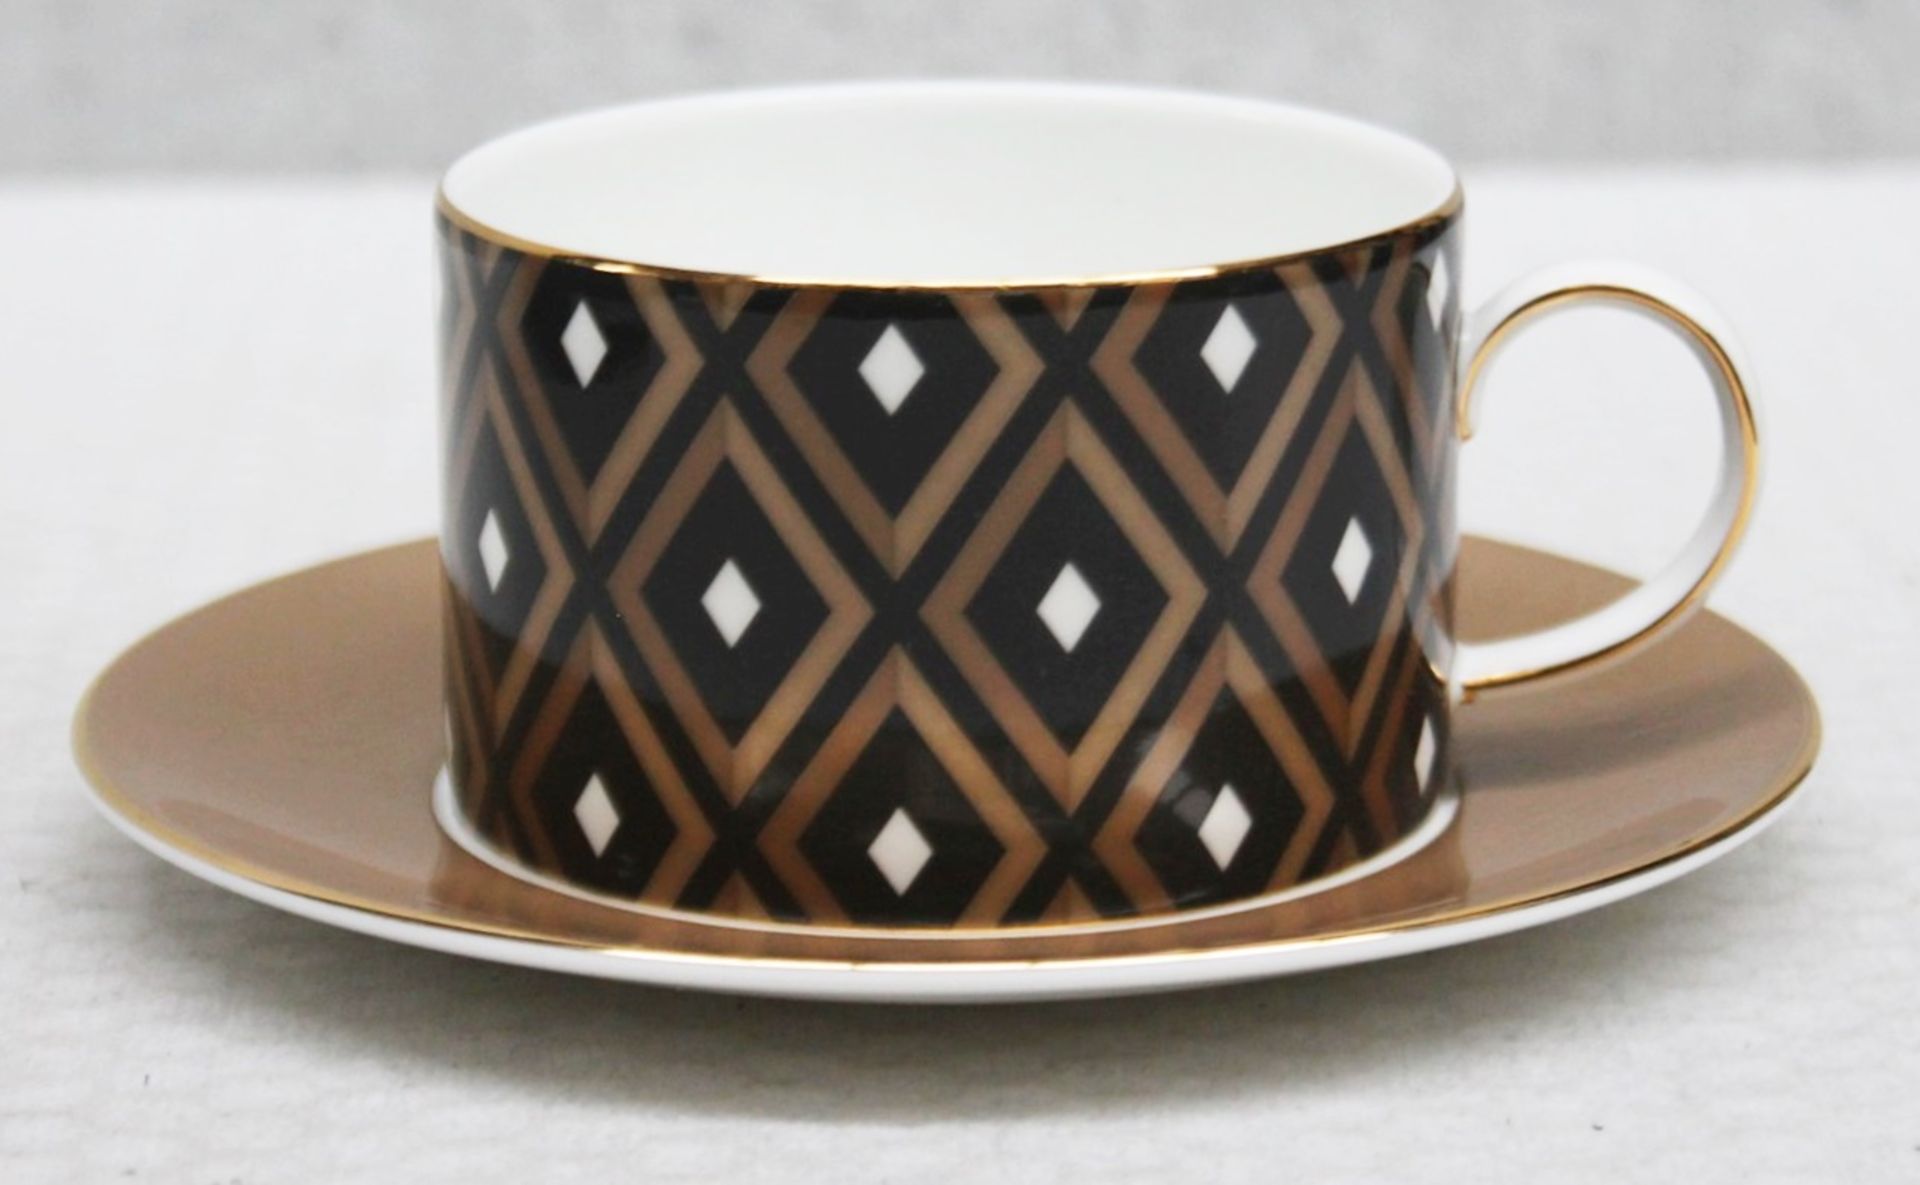 1 x WEDGWOOD 'Arris' Fine Bone China Teacup and Saucer, With An Art Deco Geometric print - Boxed - Image 5 of 6